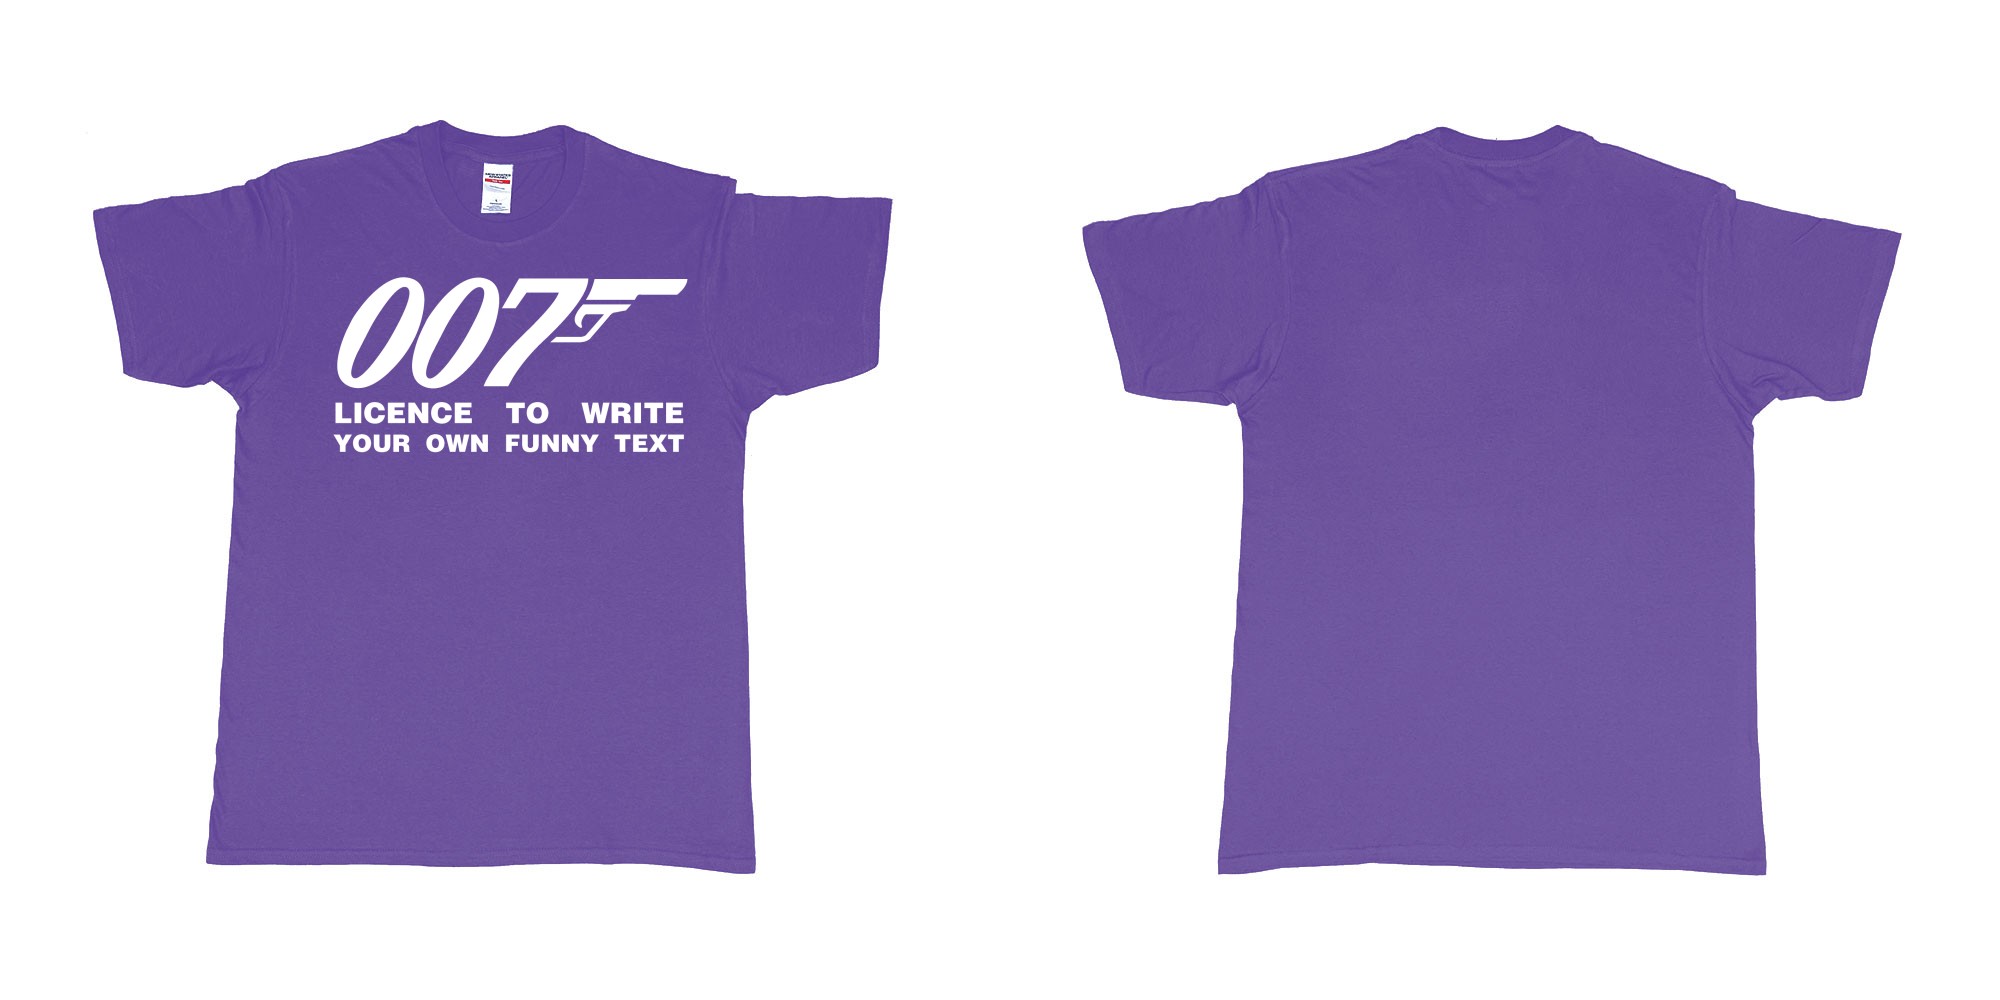 Custom tshirt design james bond logo licence to write own custom text print in fabric color purple choice your own text made in Bali by The Pirate Way